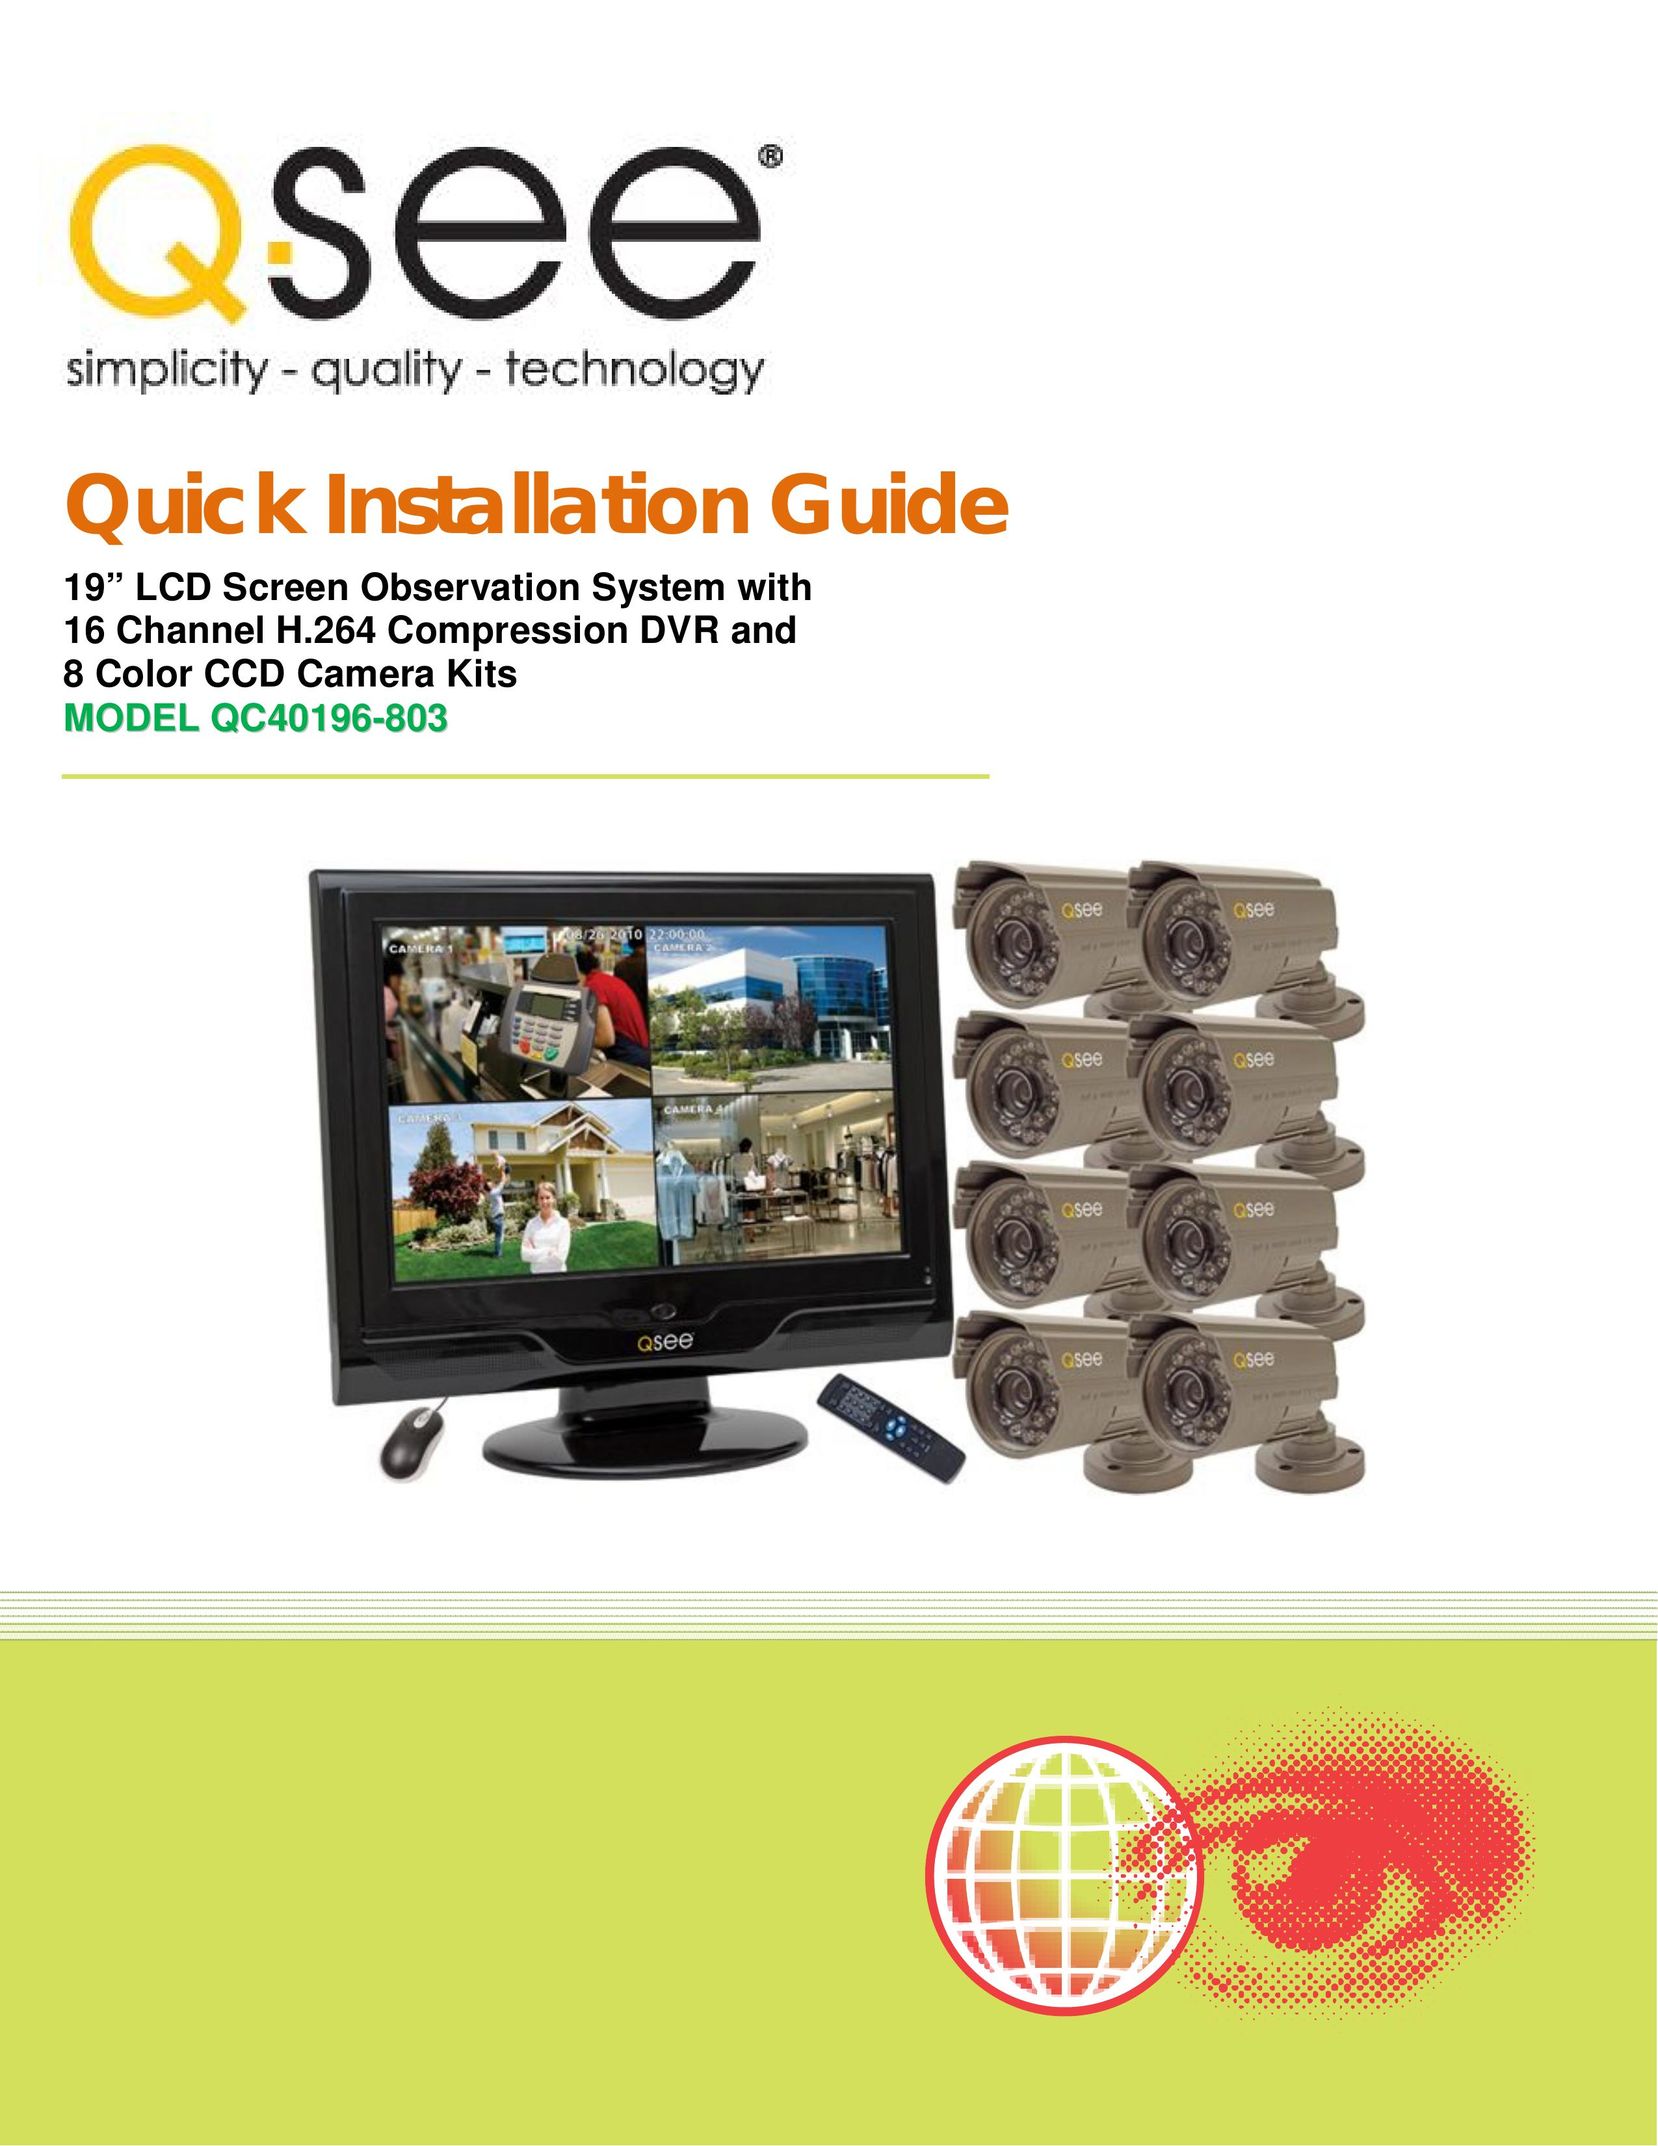 Q-See qc40196-803 Home Security System User Manual